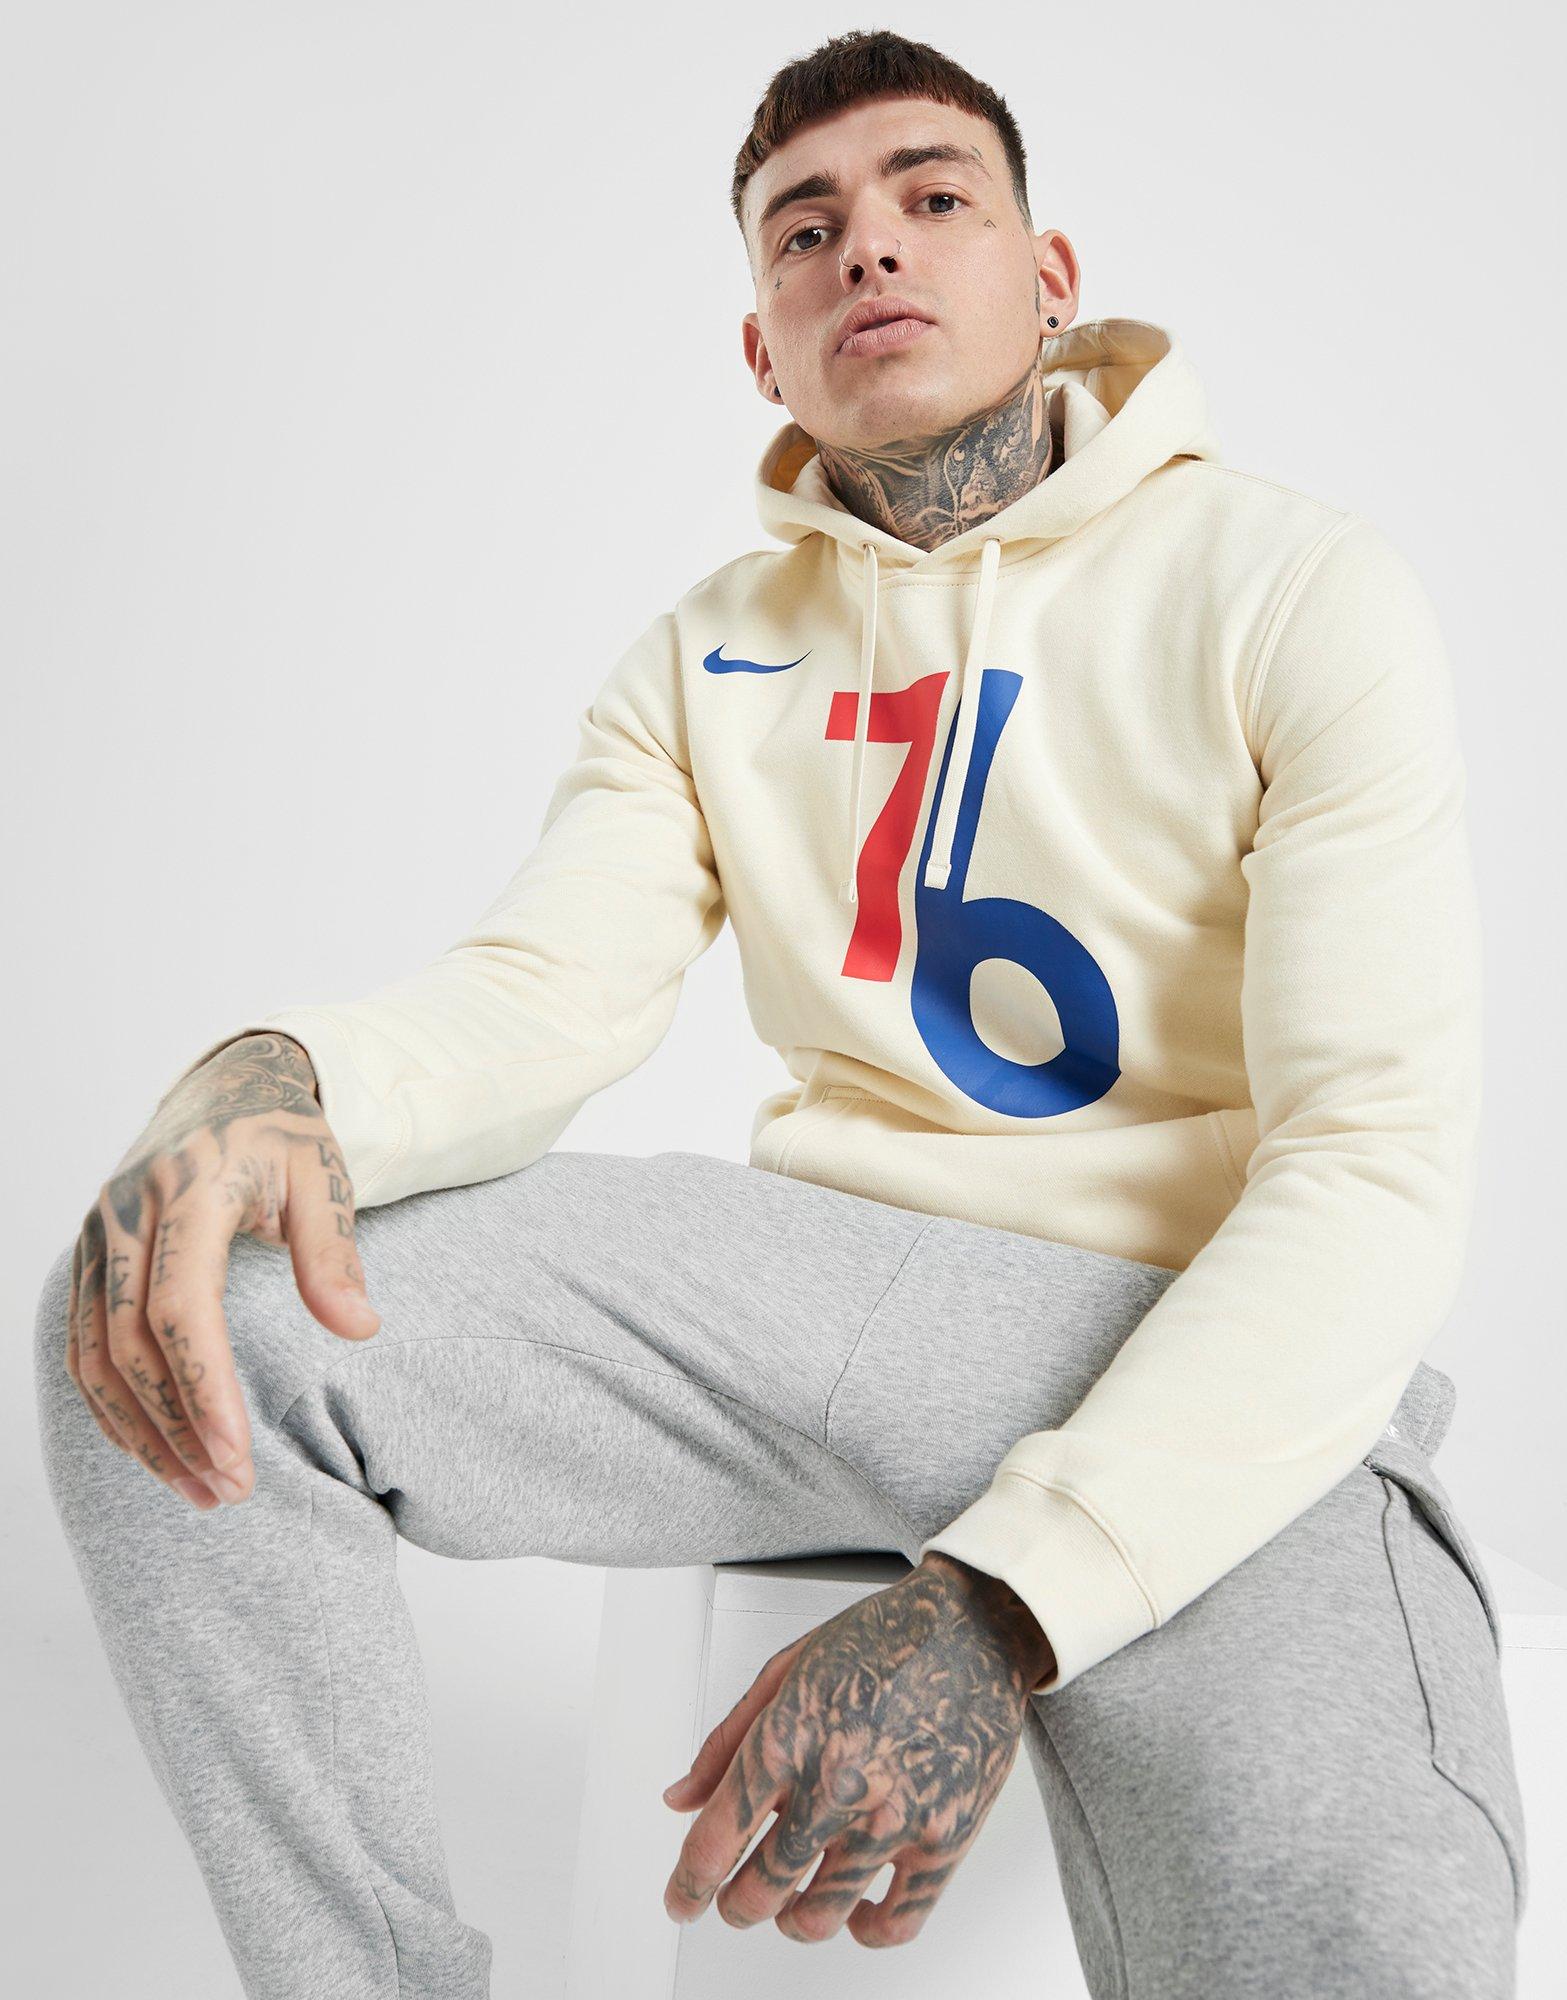 sixers city edition hoodie